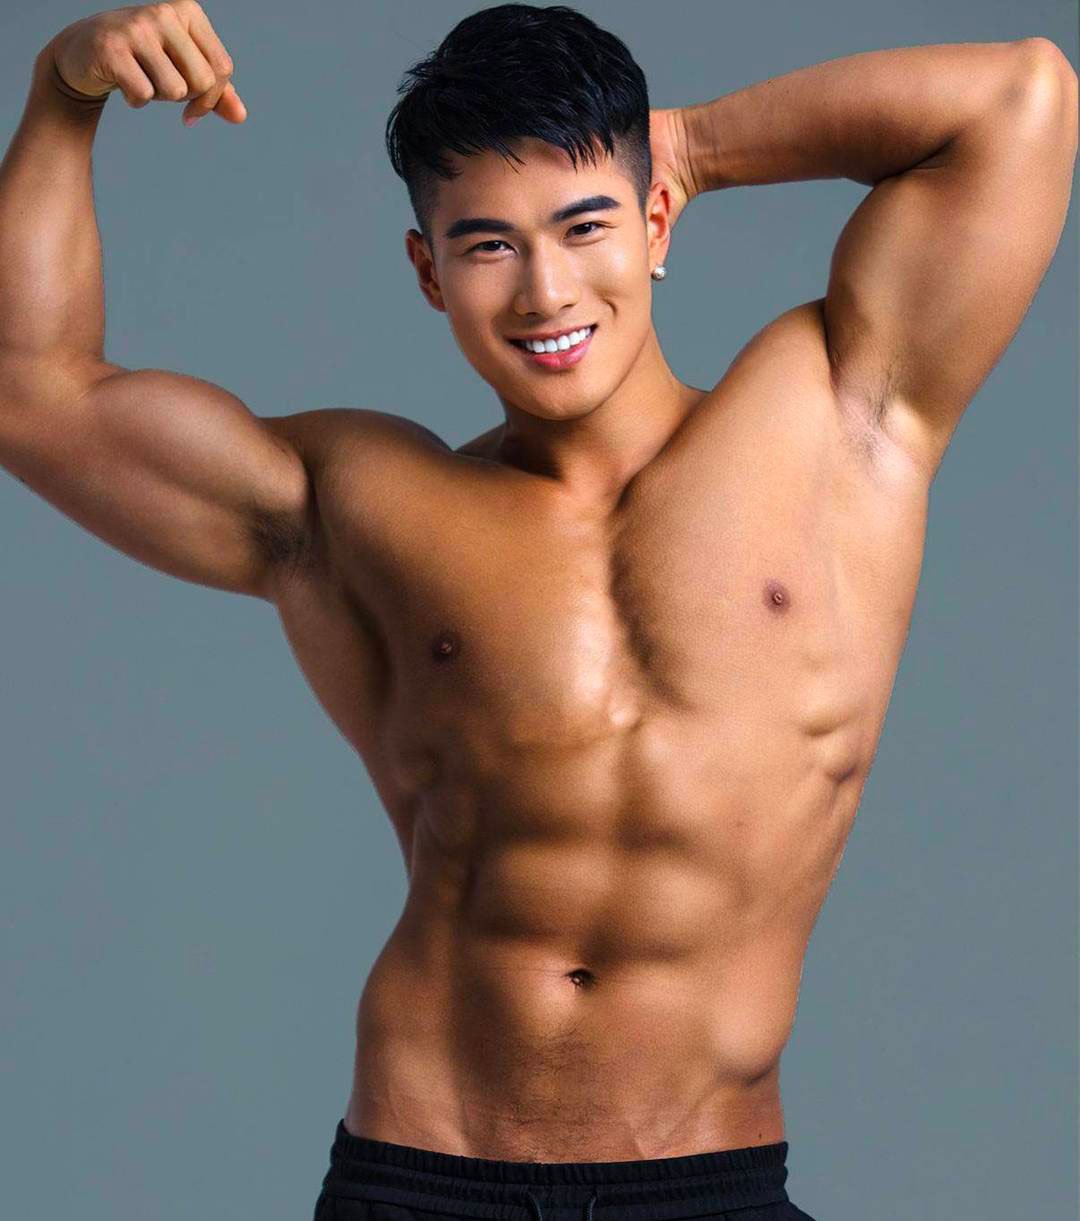 “More Asian Male models at
https://t.co/UvqYtSj52Y

